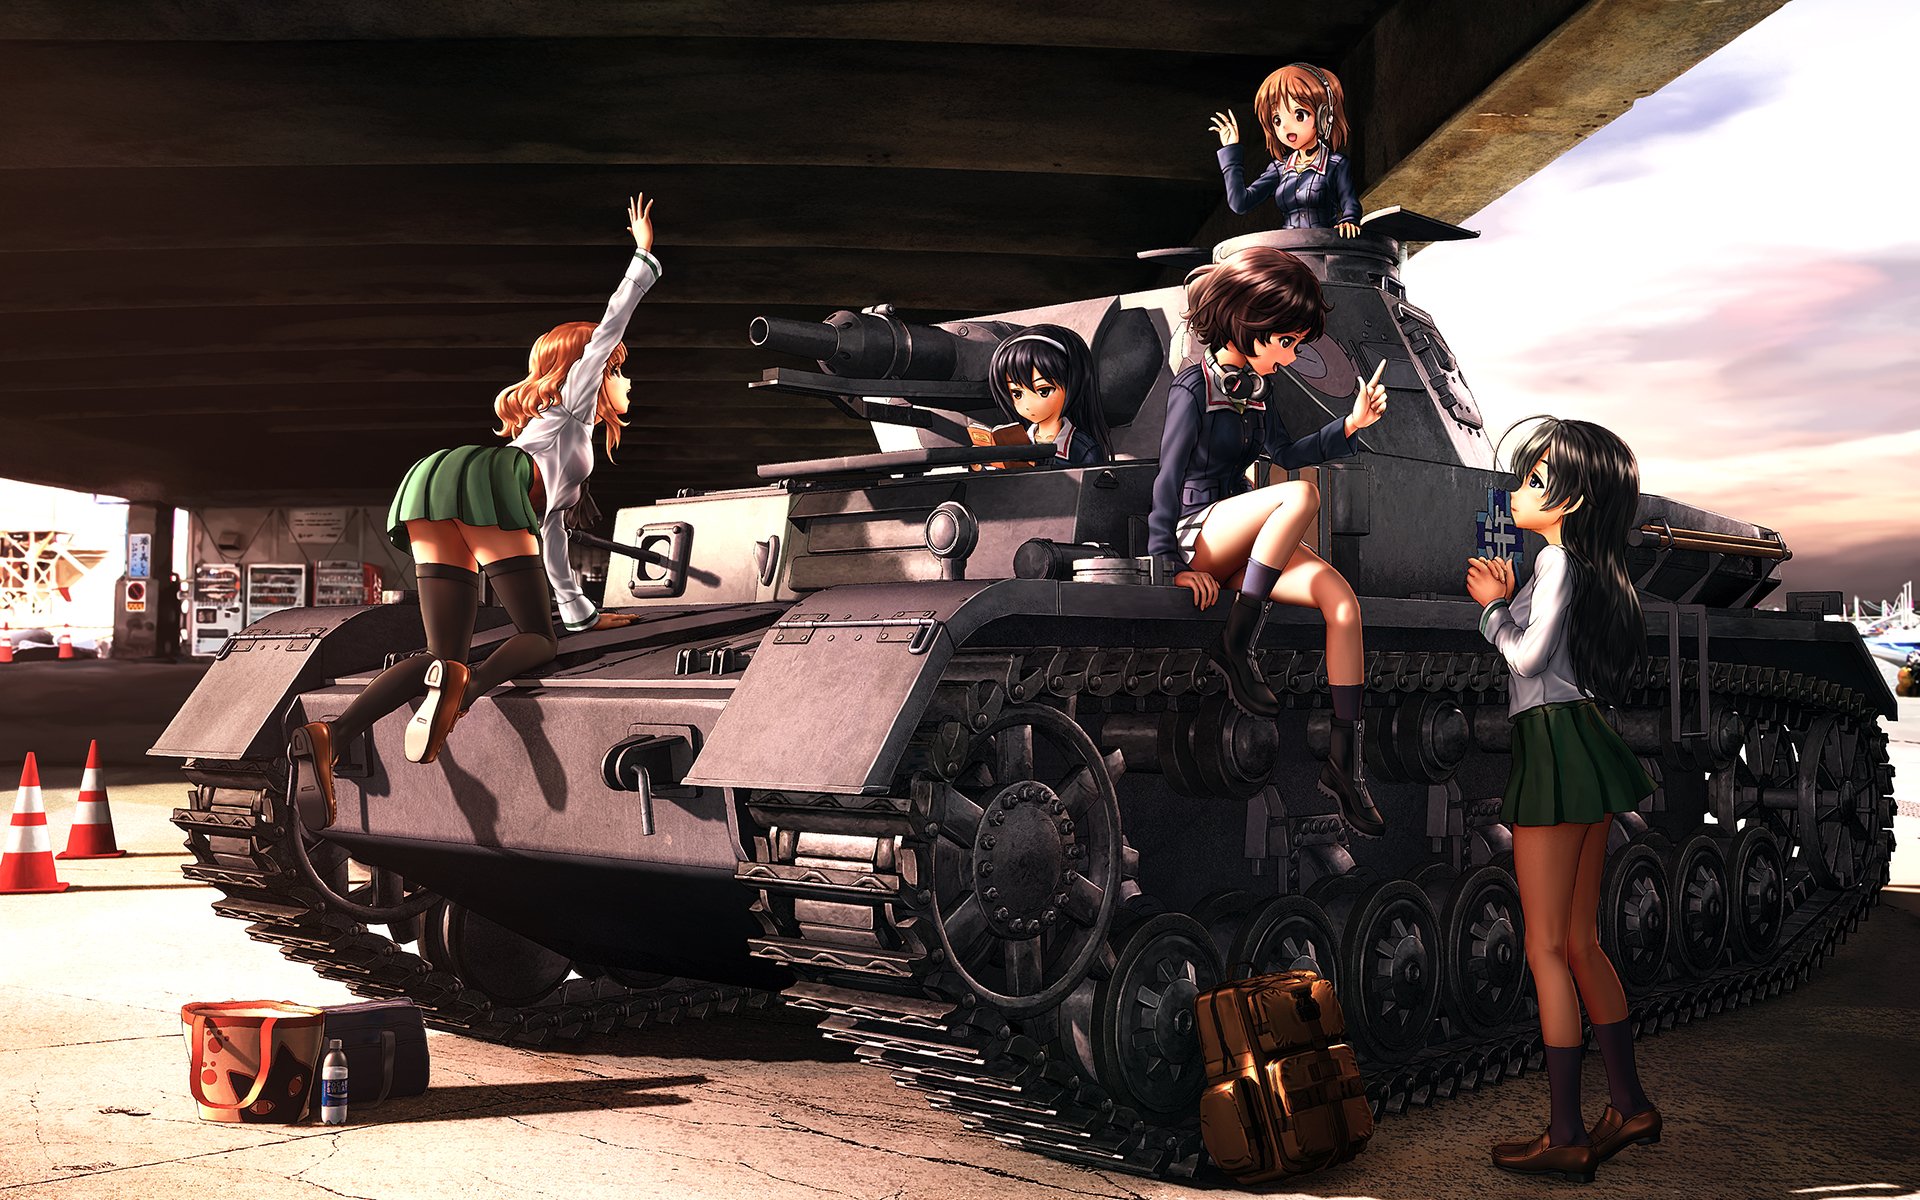 446 Girls Und Panzer Hd Wallpapers Background Images Wallpaper Abyss